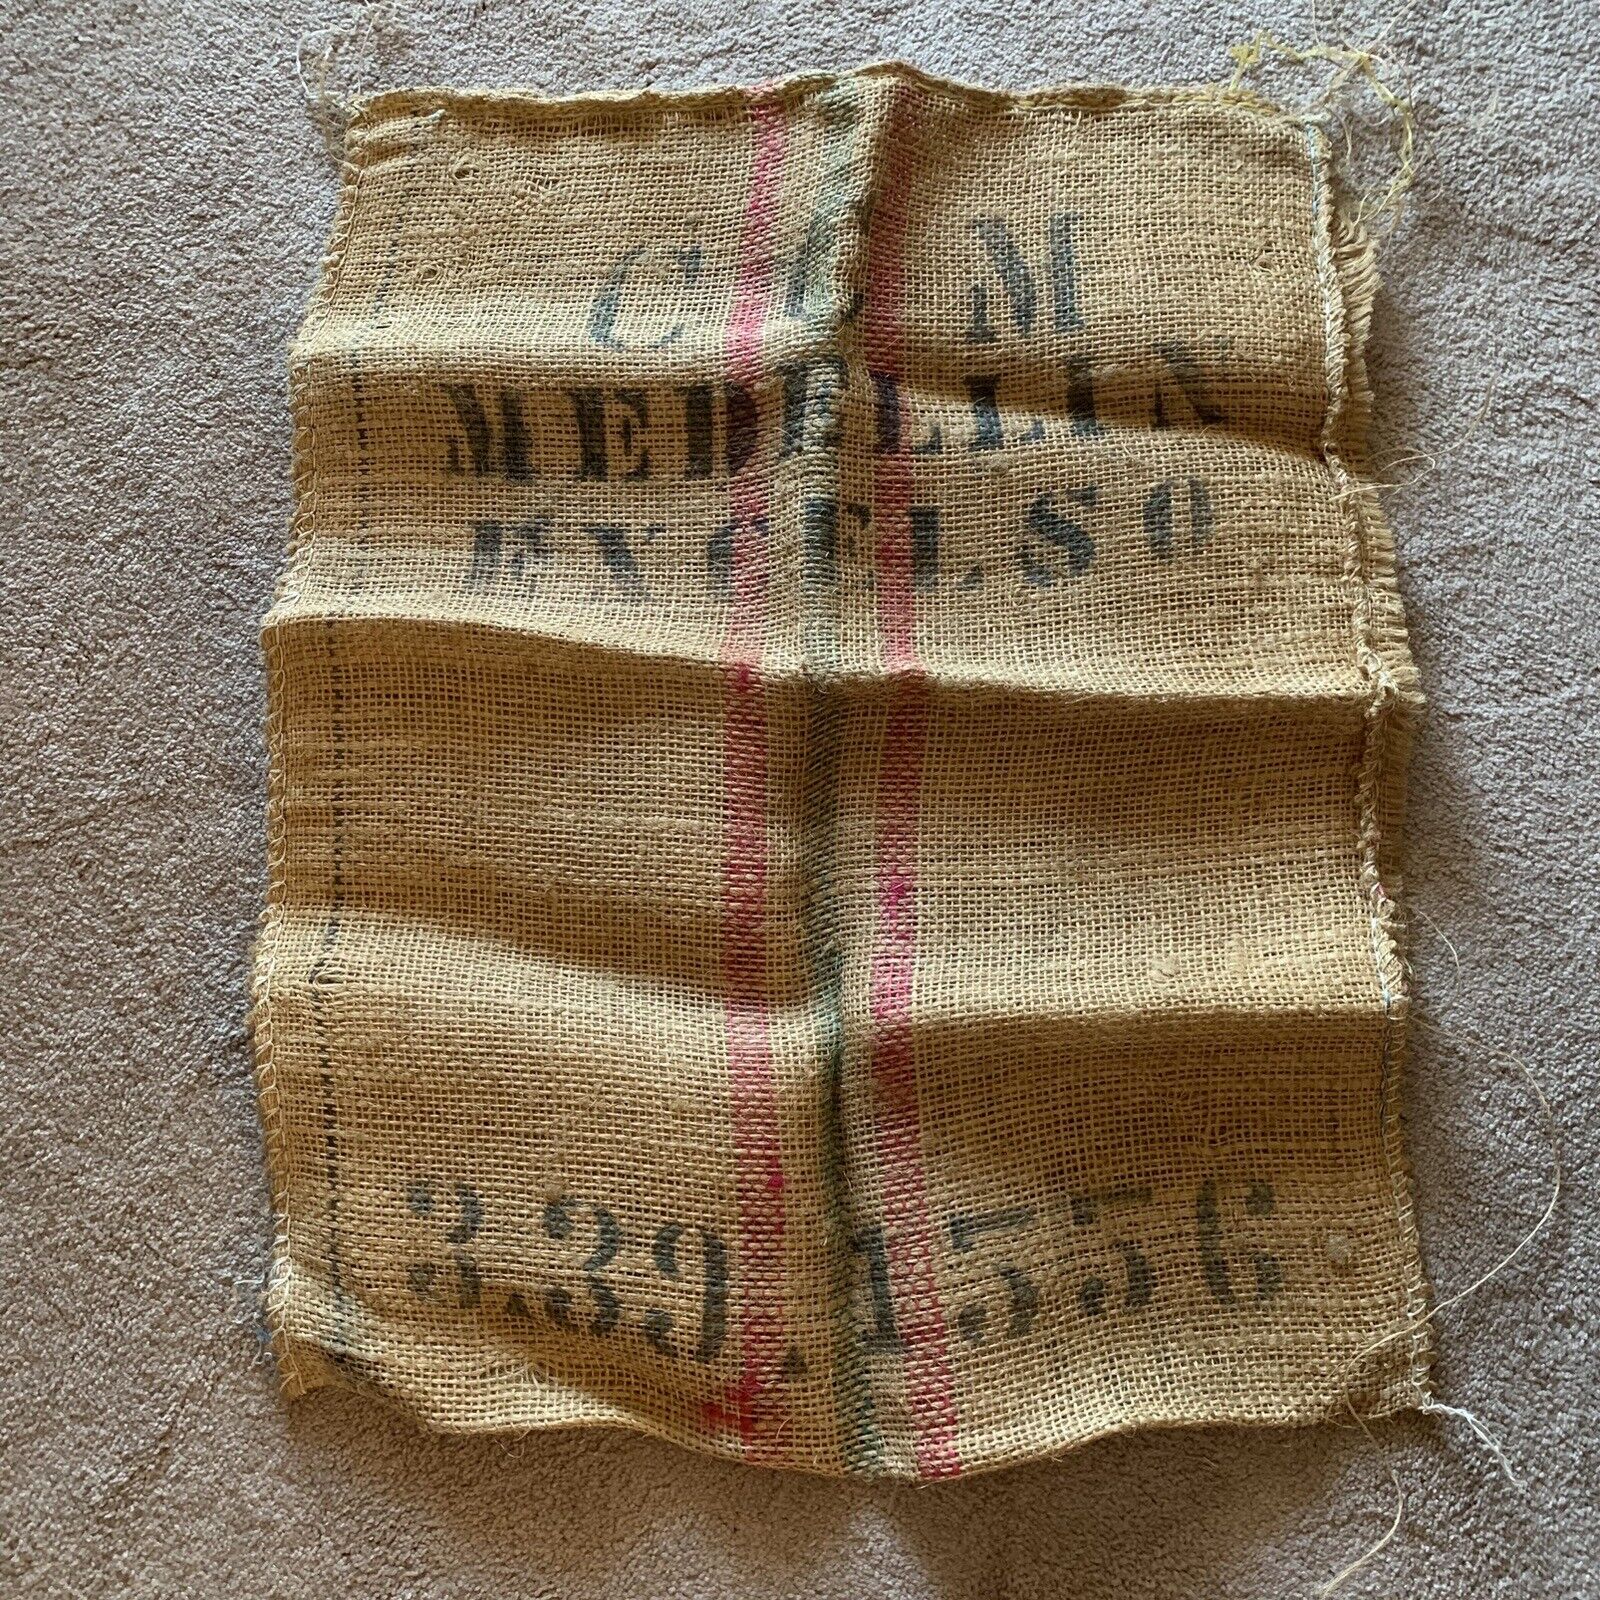 Vintage Product of Columbia Medellin Excelso Burlap Coffee Sack Bag